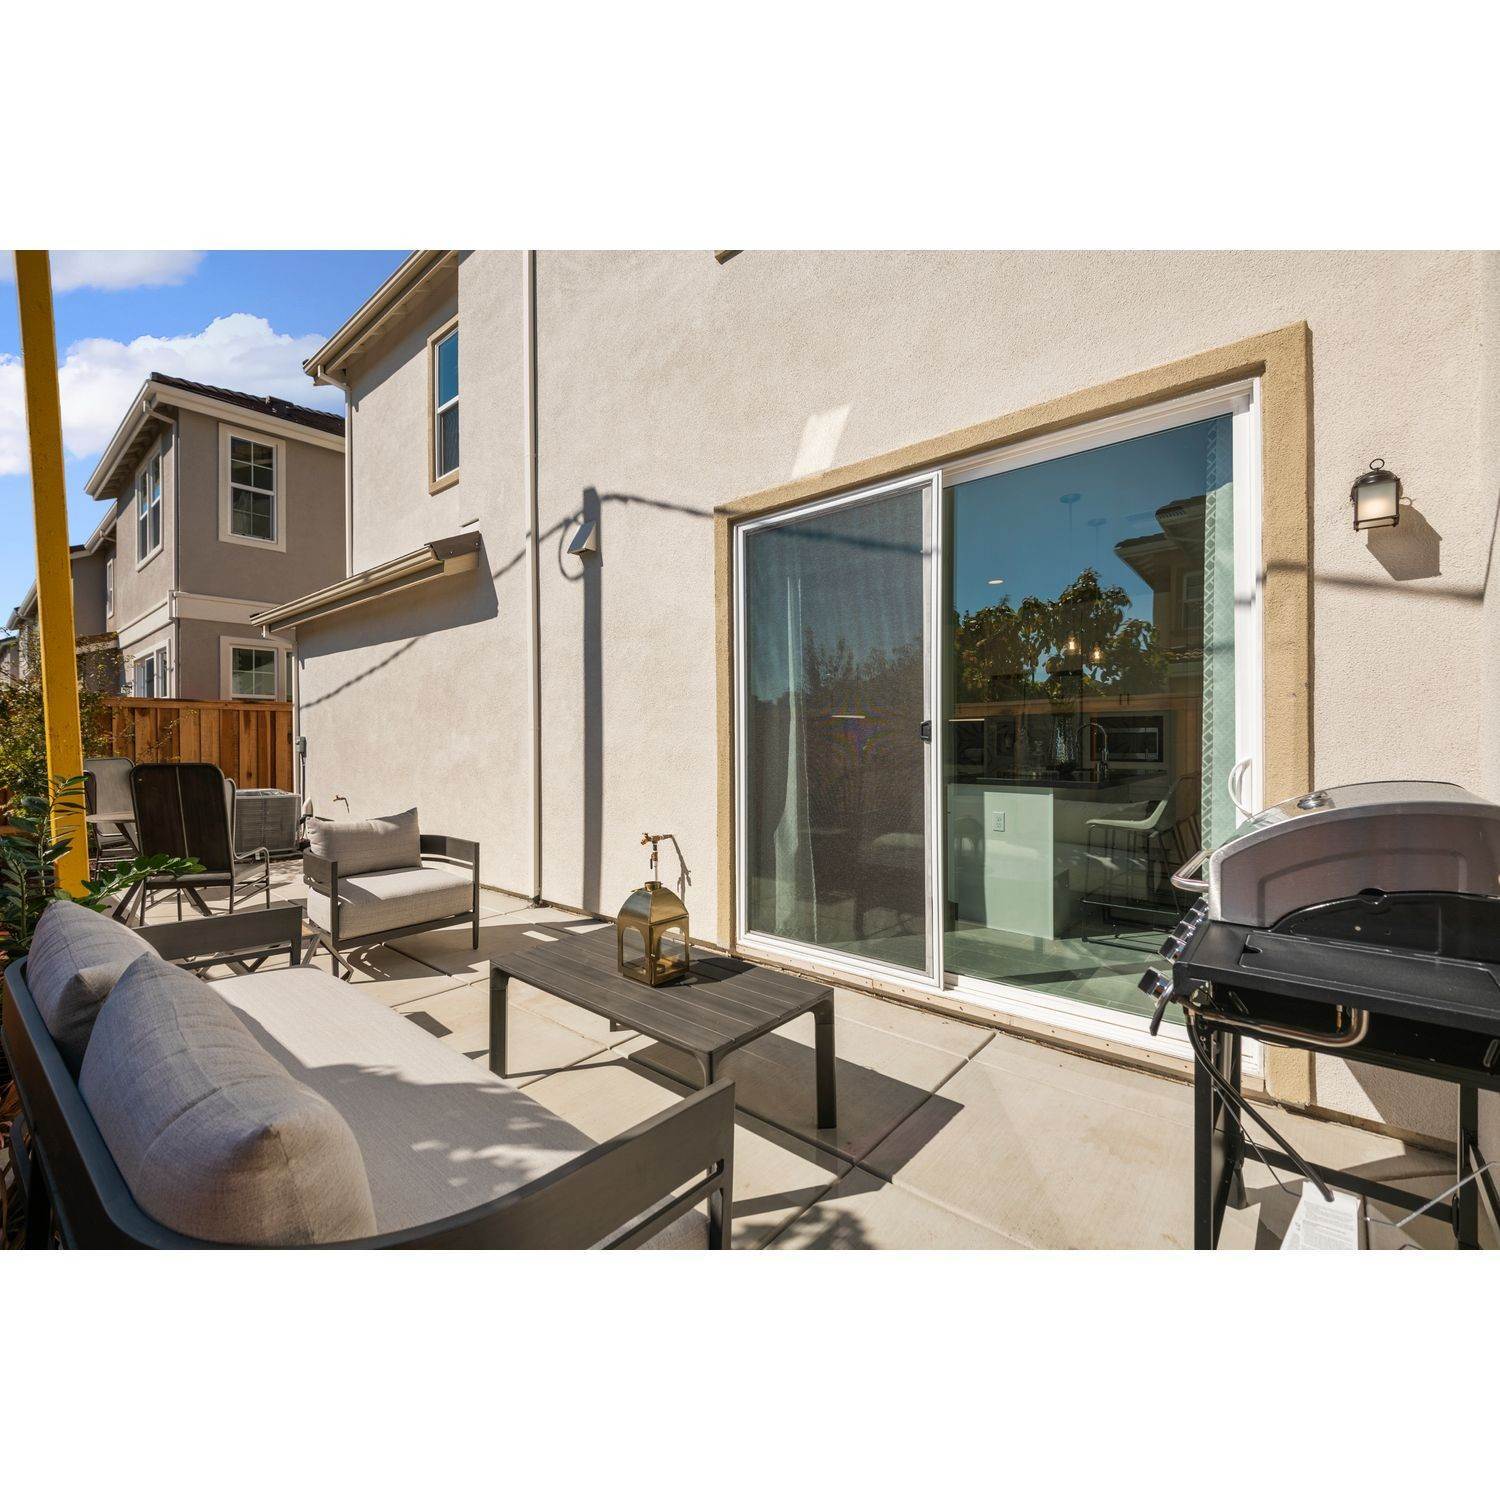 15. Single Family for Sale at Hayward, CA 94544